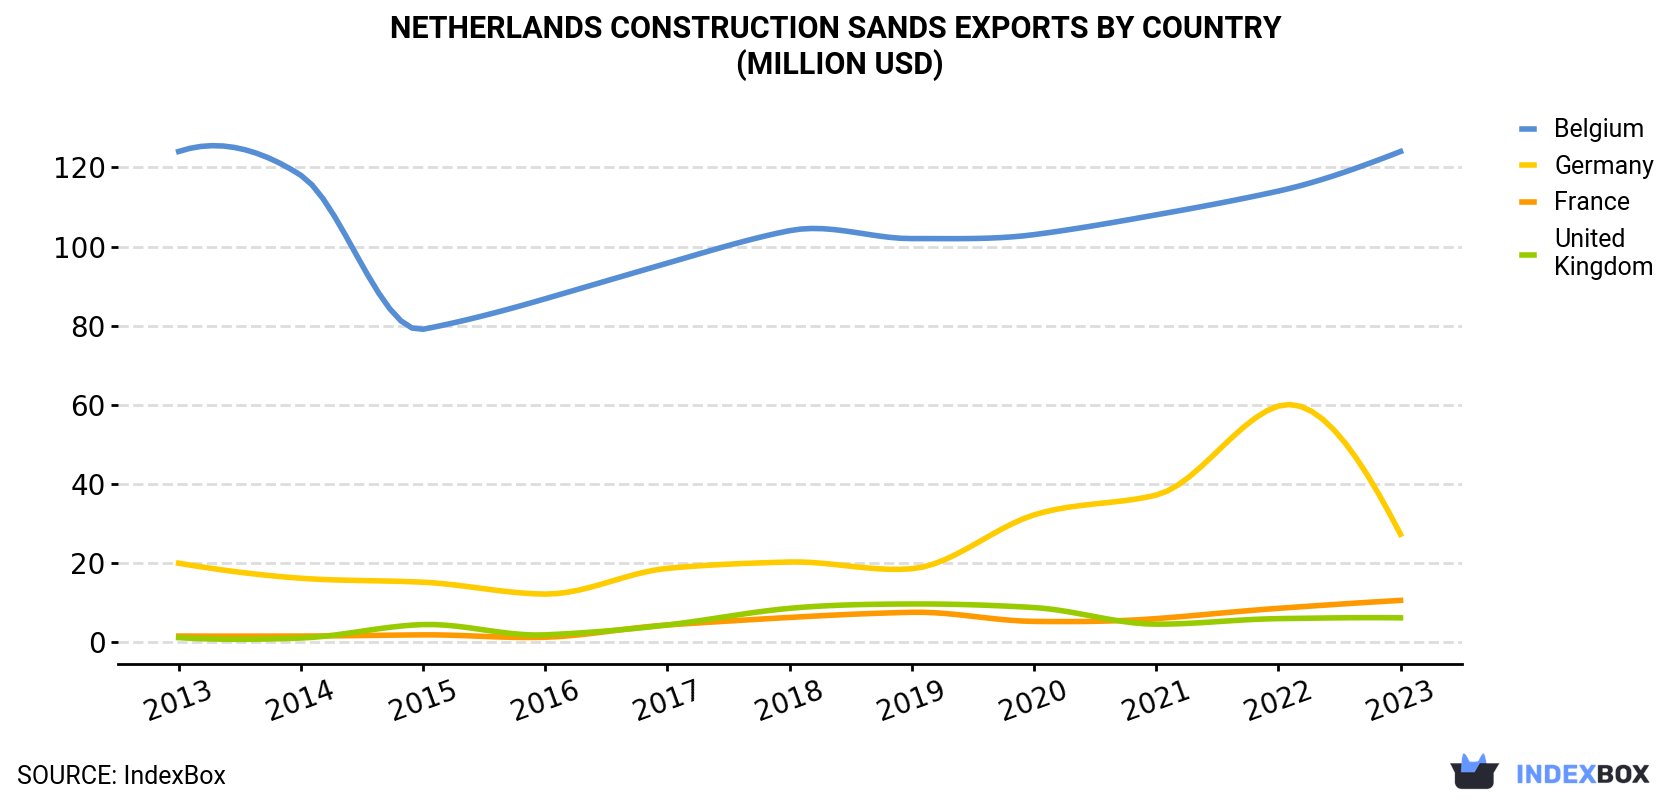 Netherlands Construction Sands Exports By Country (Million USD)